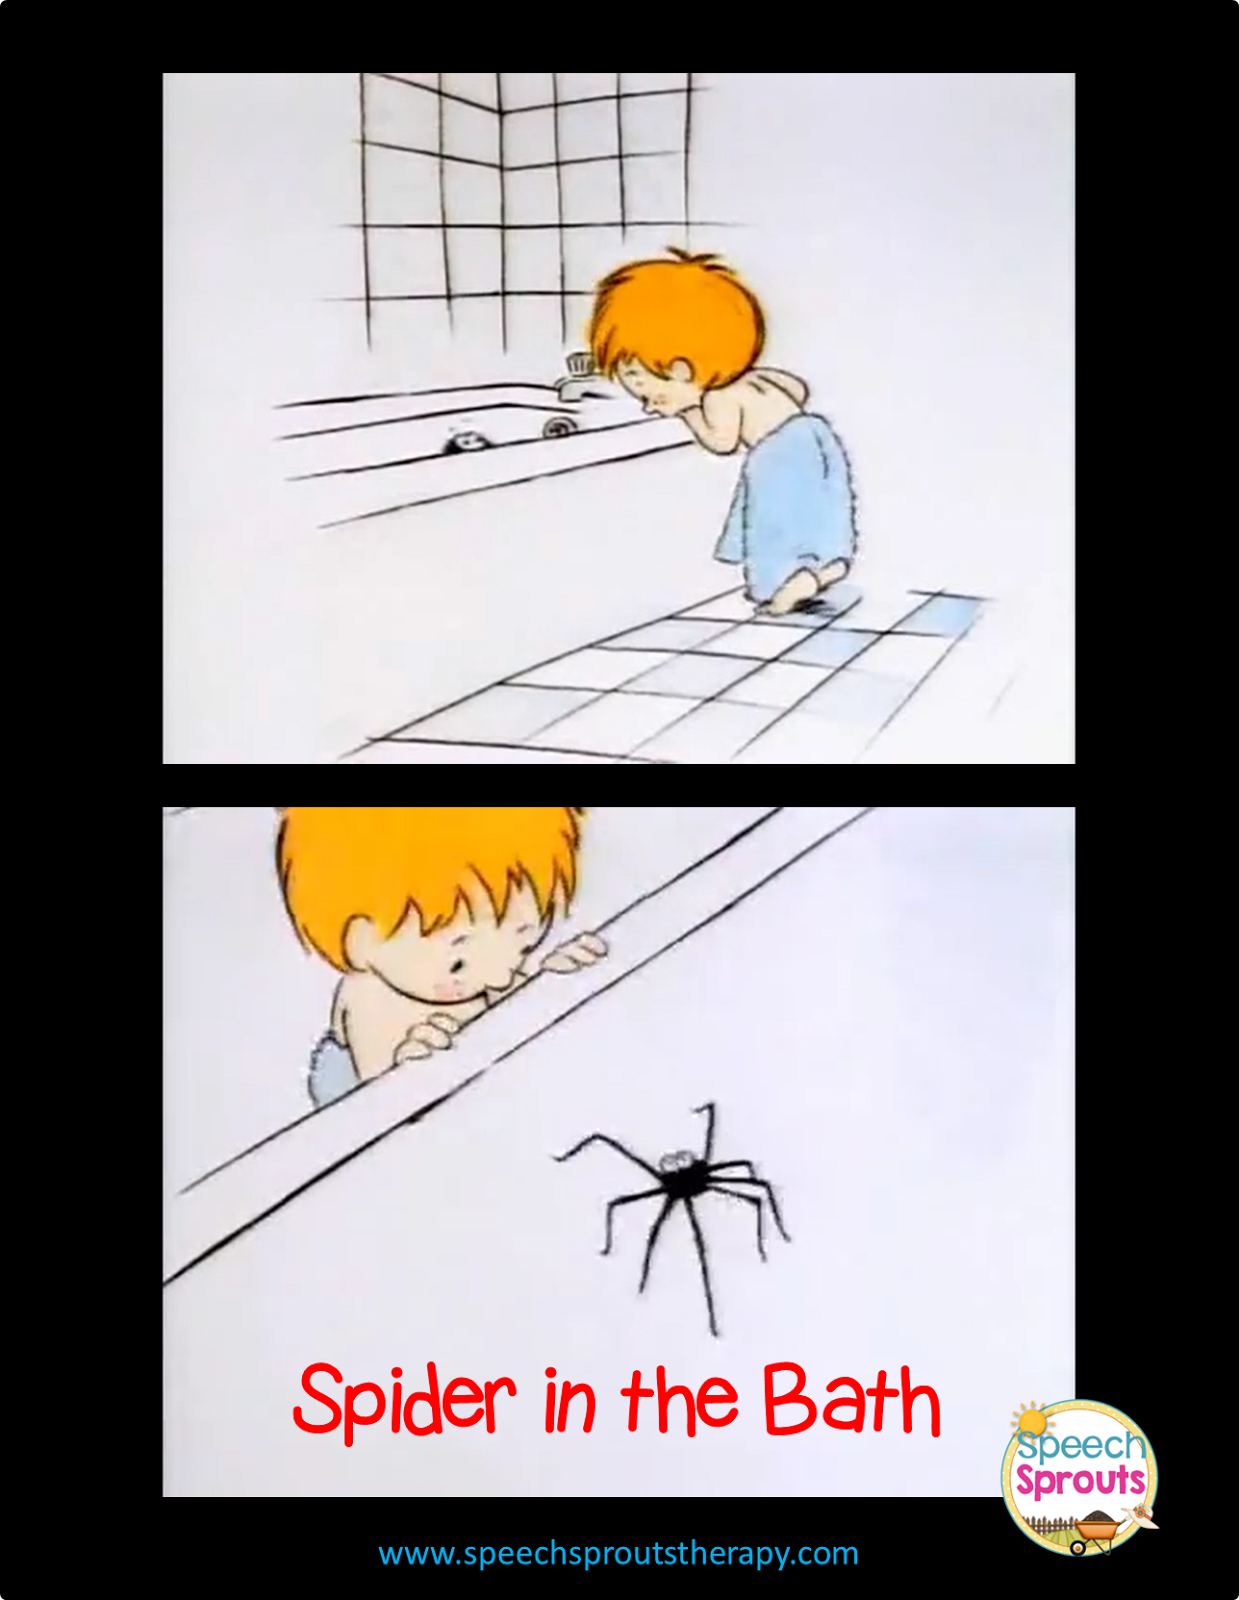 Spider in the bath video